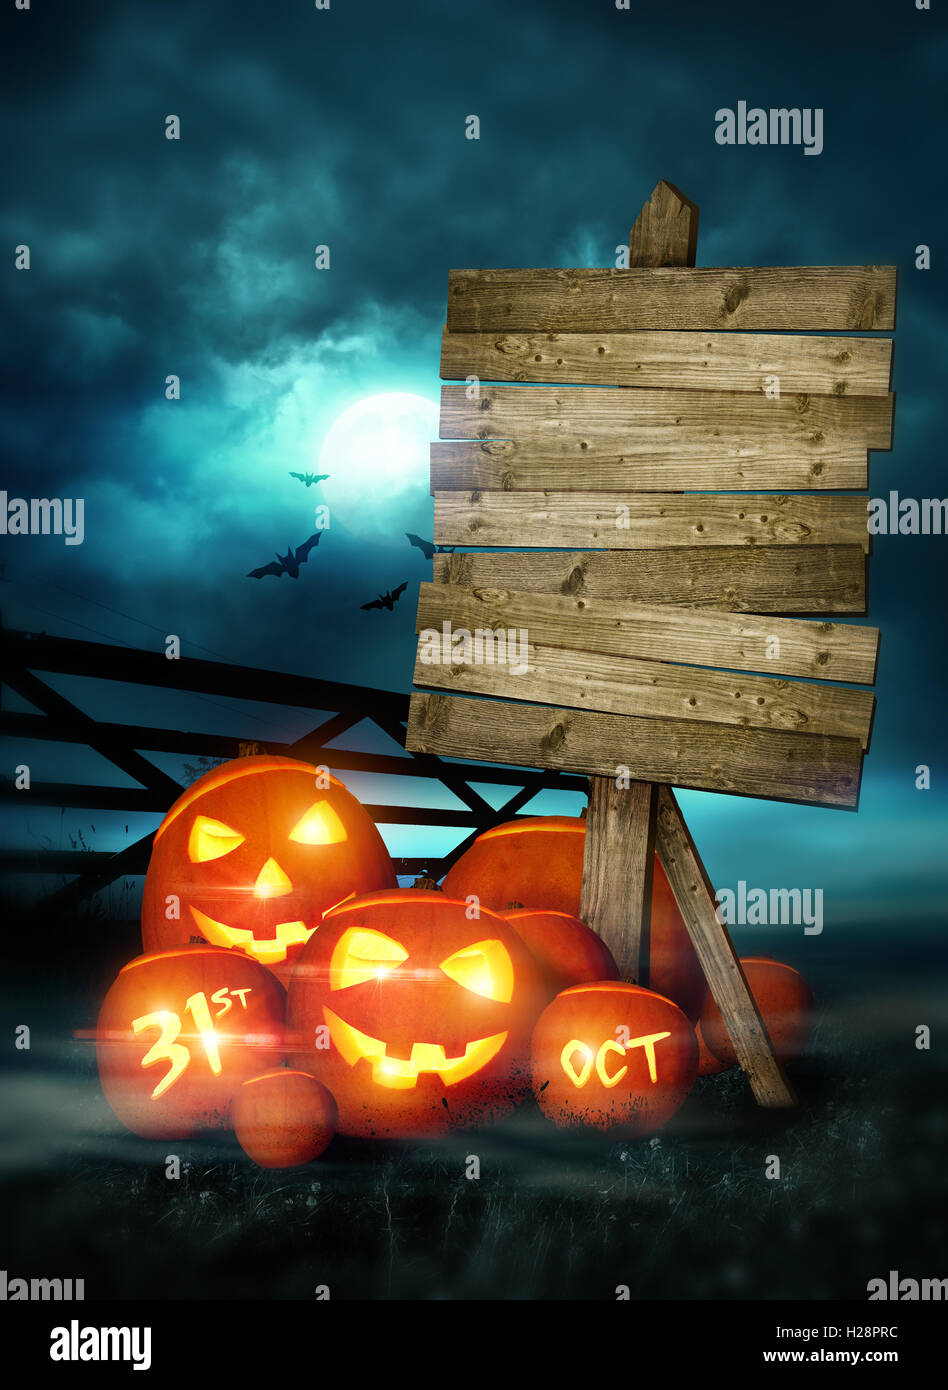 Happy Halloween background decorated with pumpkins and fairy lights! Illustration. Stock Photo